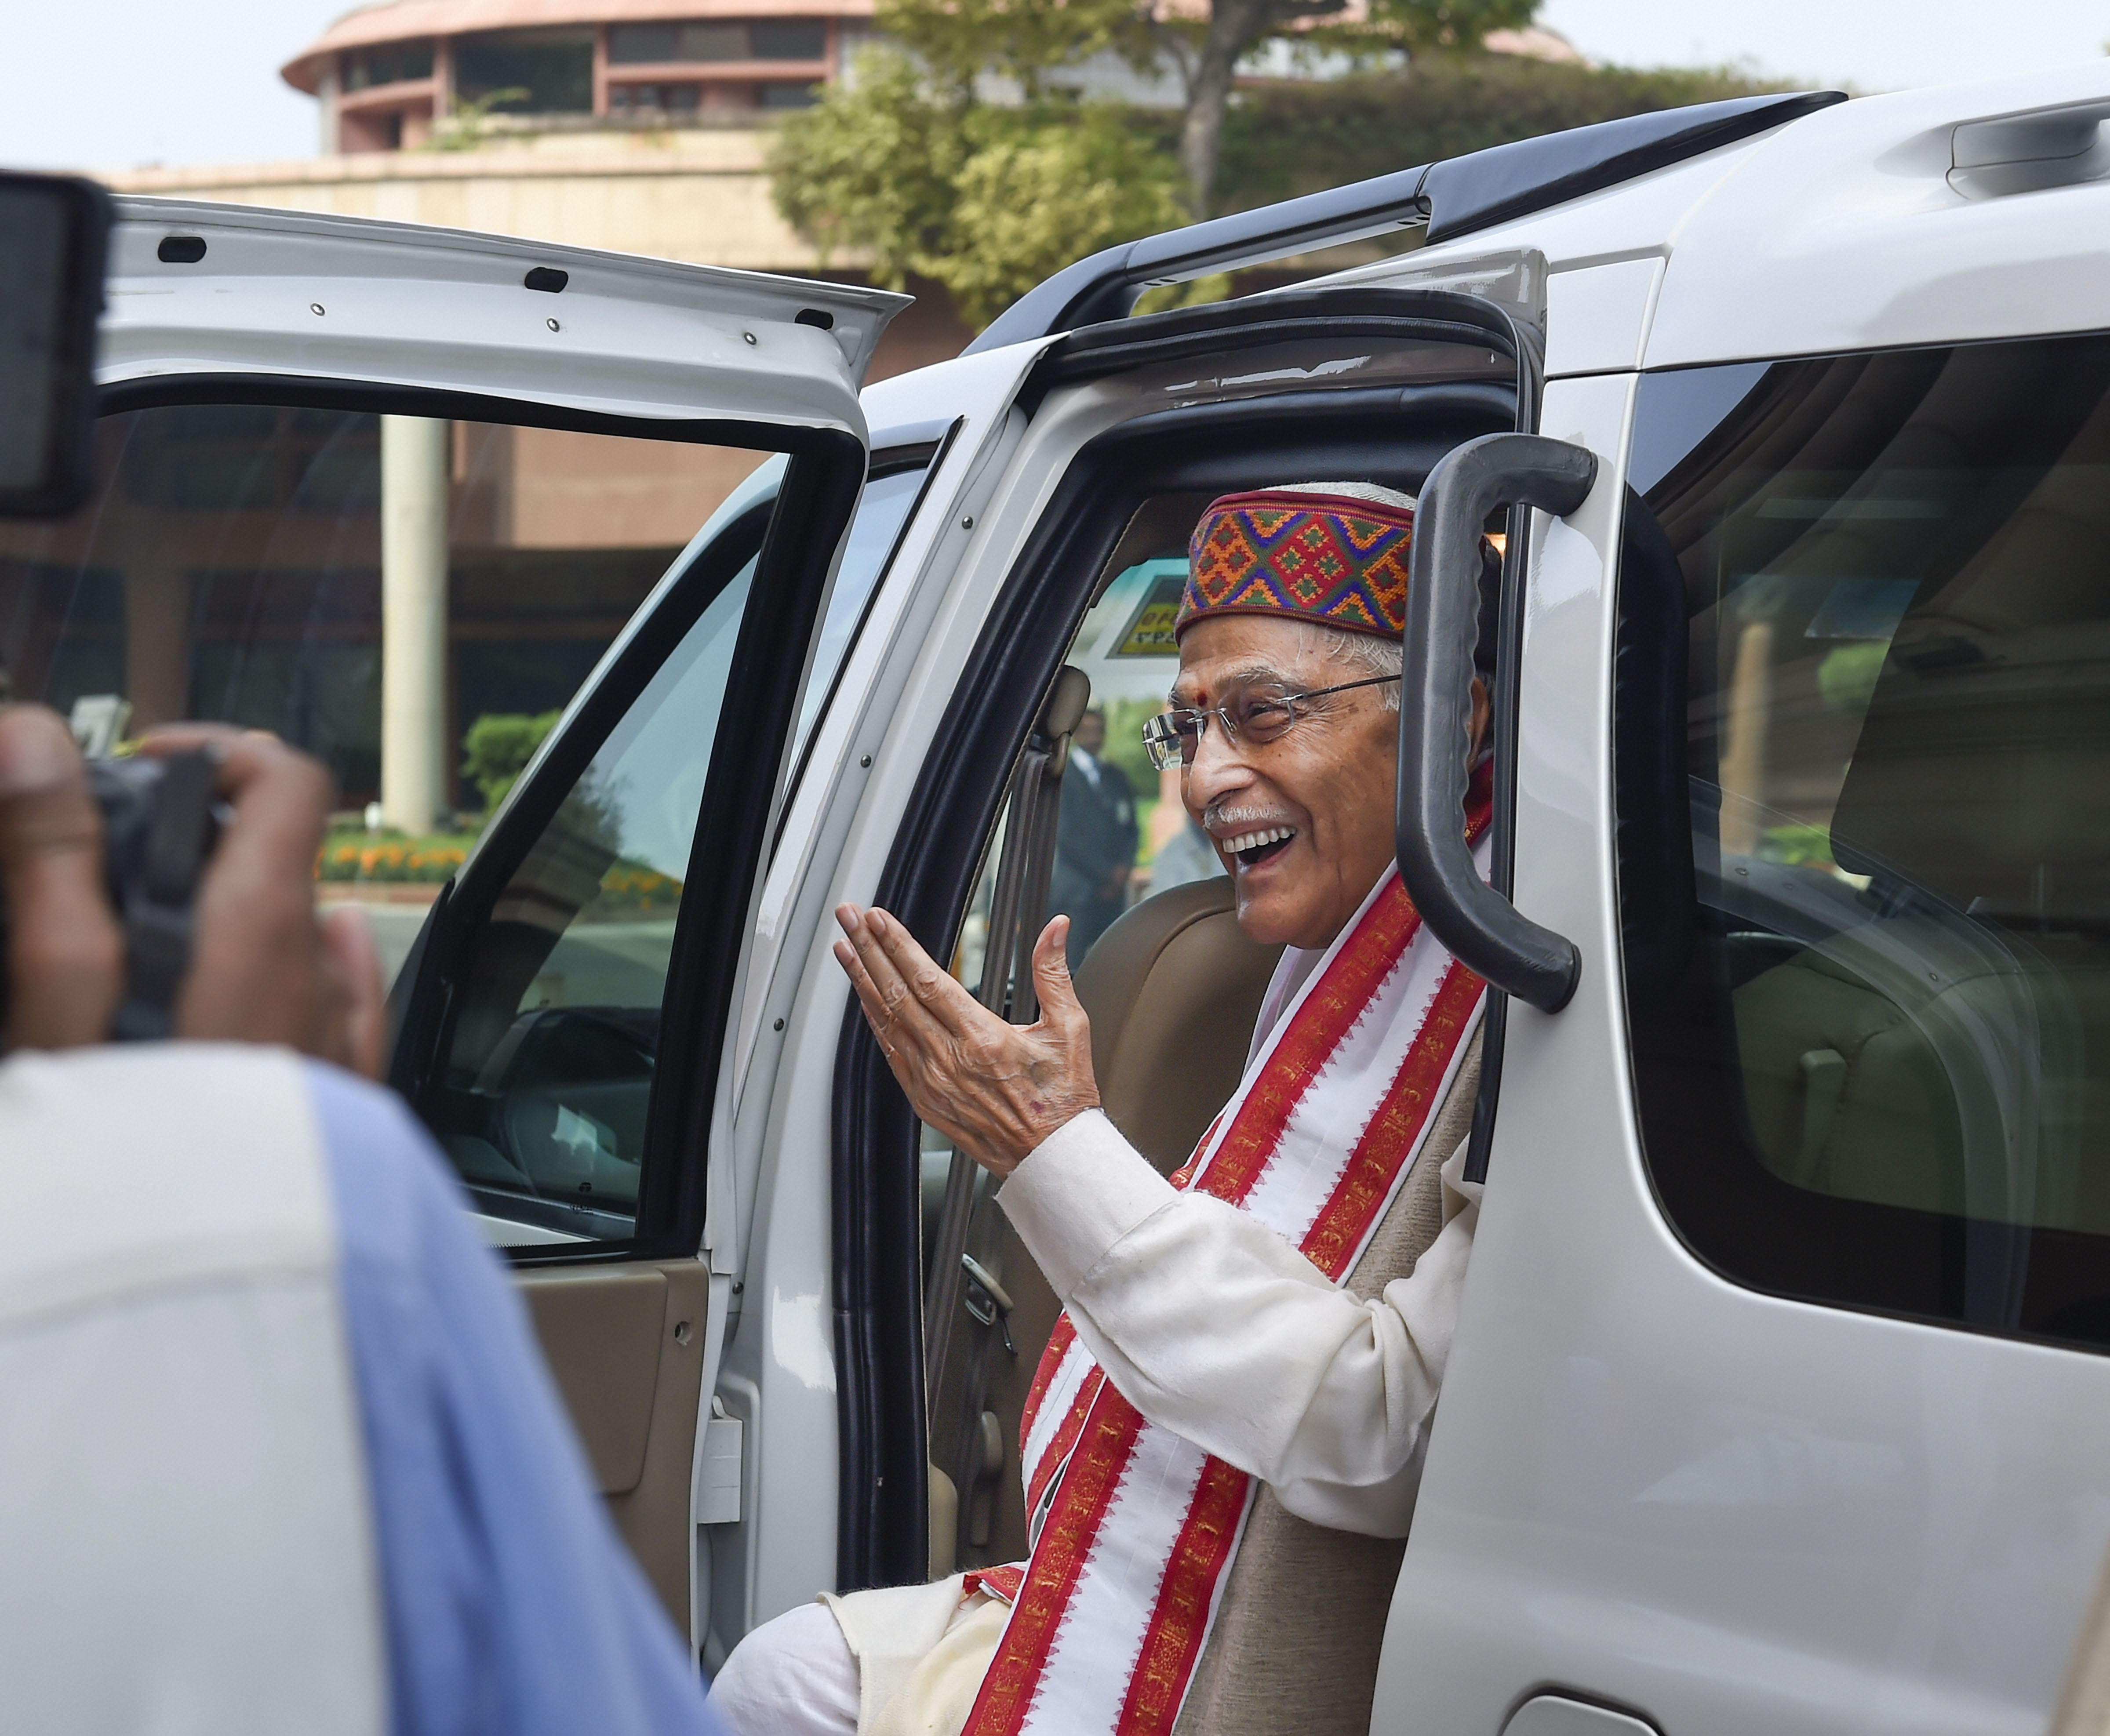 Senior BJP leader Murli Manohar Joshi shares a light moment as he arrives on the first day of the Winter Session of Parliament - pti